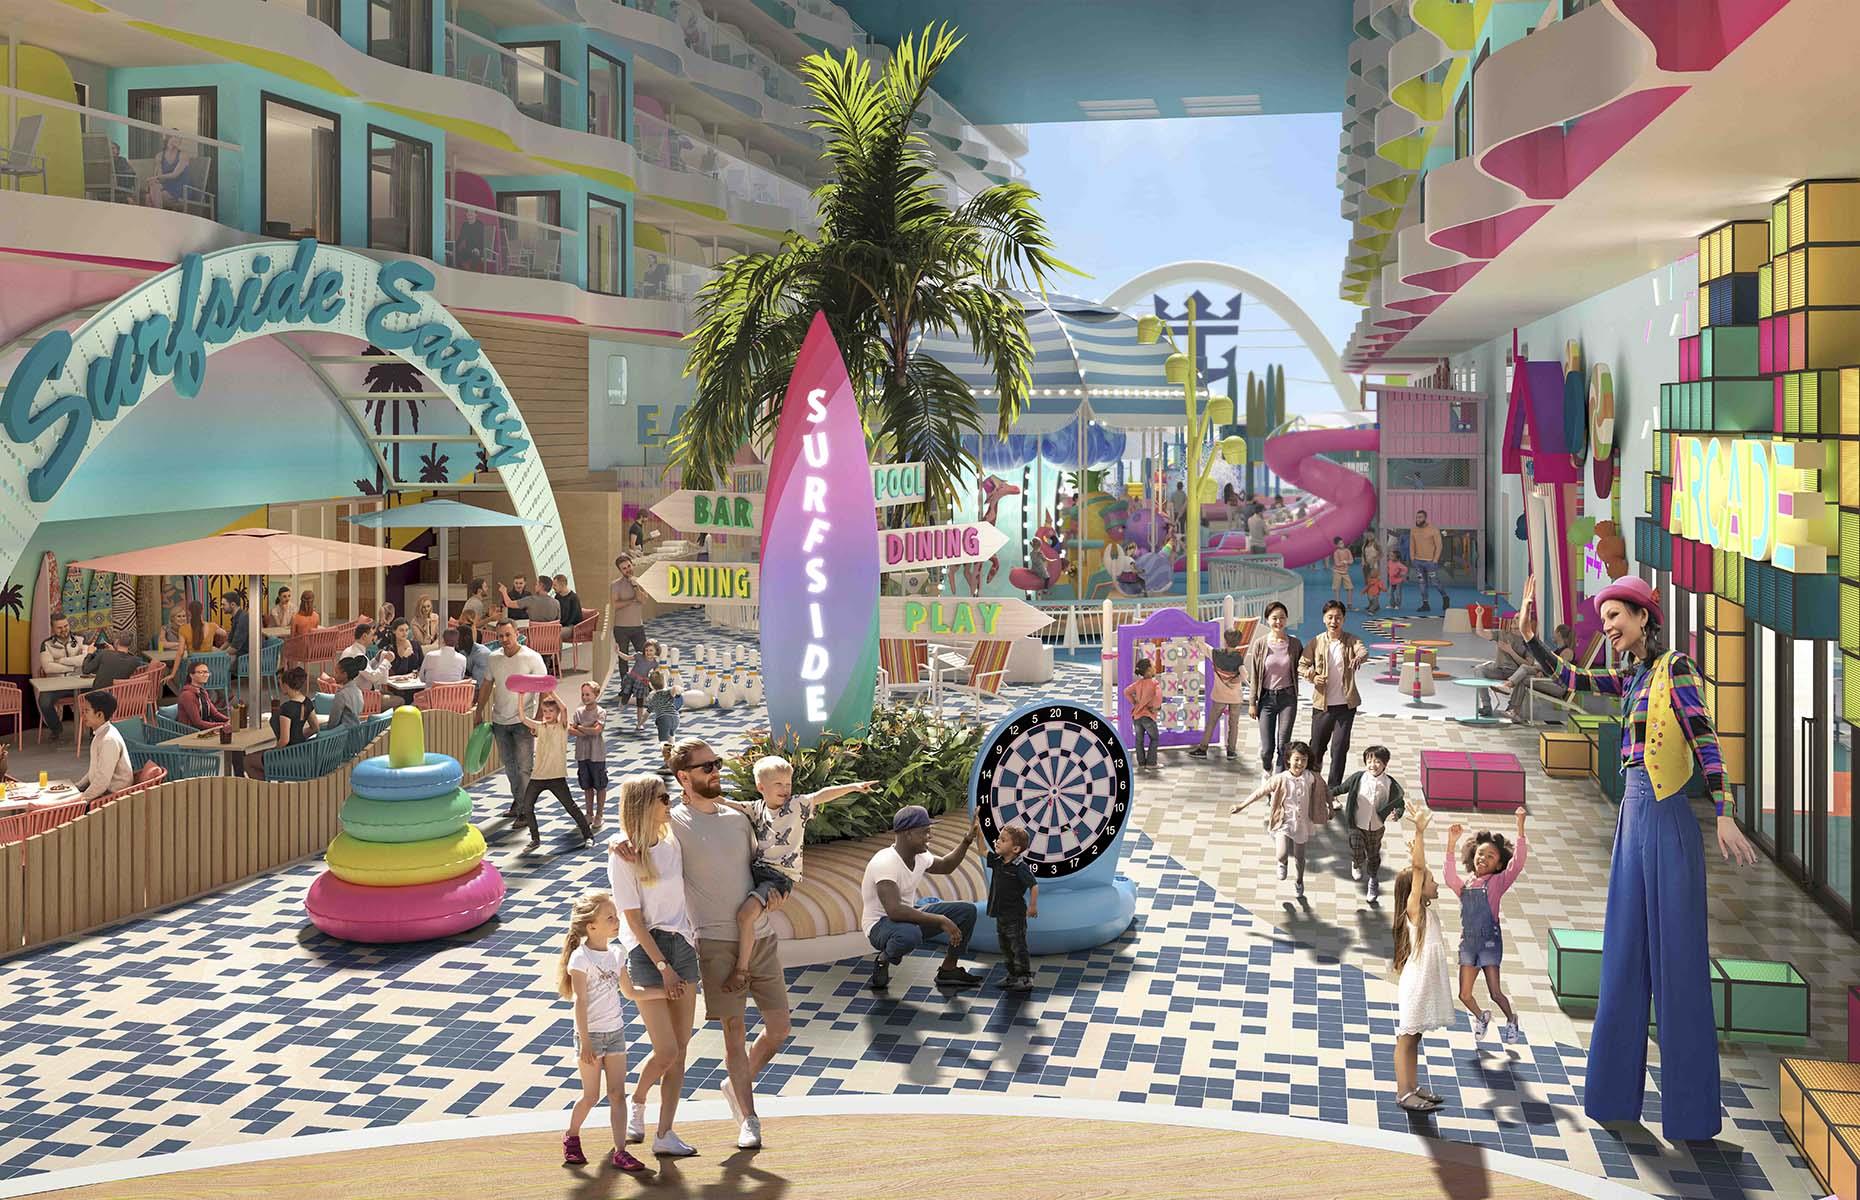 <p>The colorful Surfside neighborhood (pictured) is the ultimate hotspot for families.</p>  <p>Located on deck seven, activities include swimming areas appropriate for both babies and children, as well as a charming beach-themed carousel, arcades, and family-friendly events and eateries.</p>